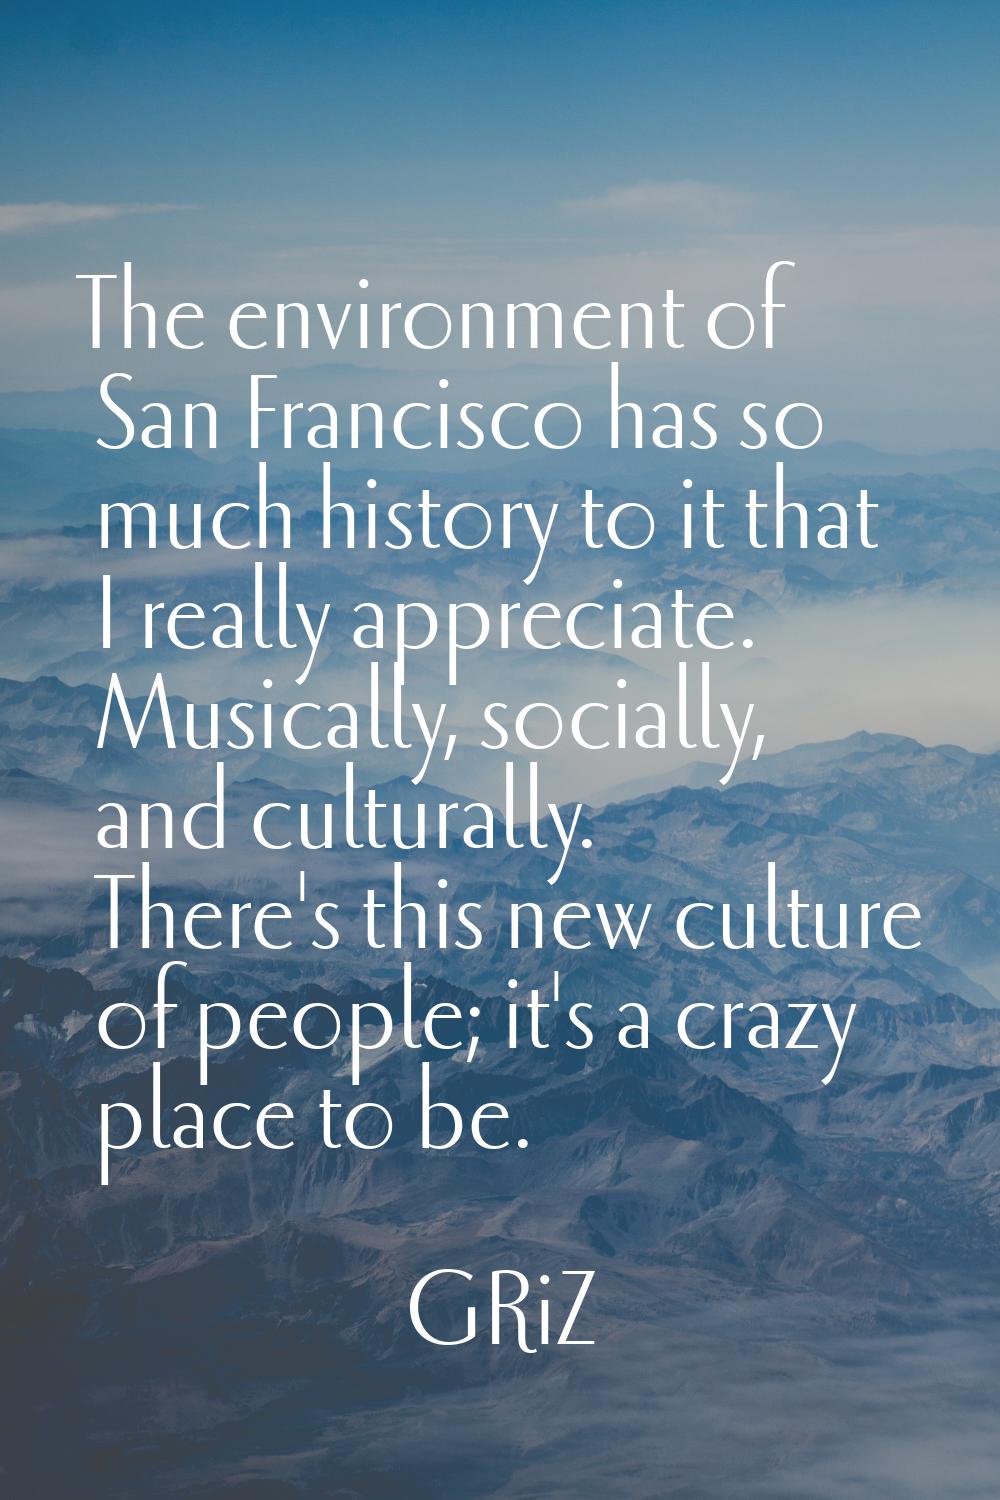 The environment of San Francisco has so much history to it that I really appreciate. Musically, soc